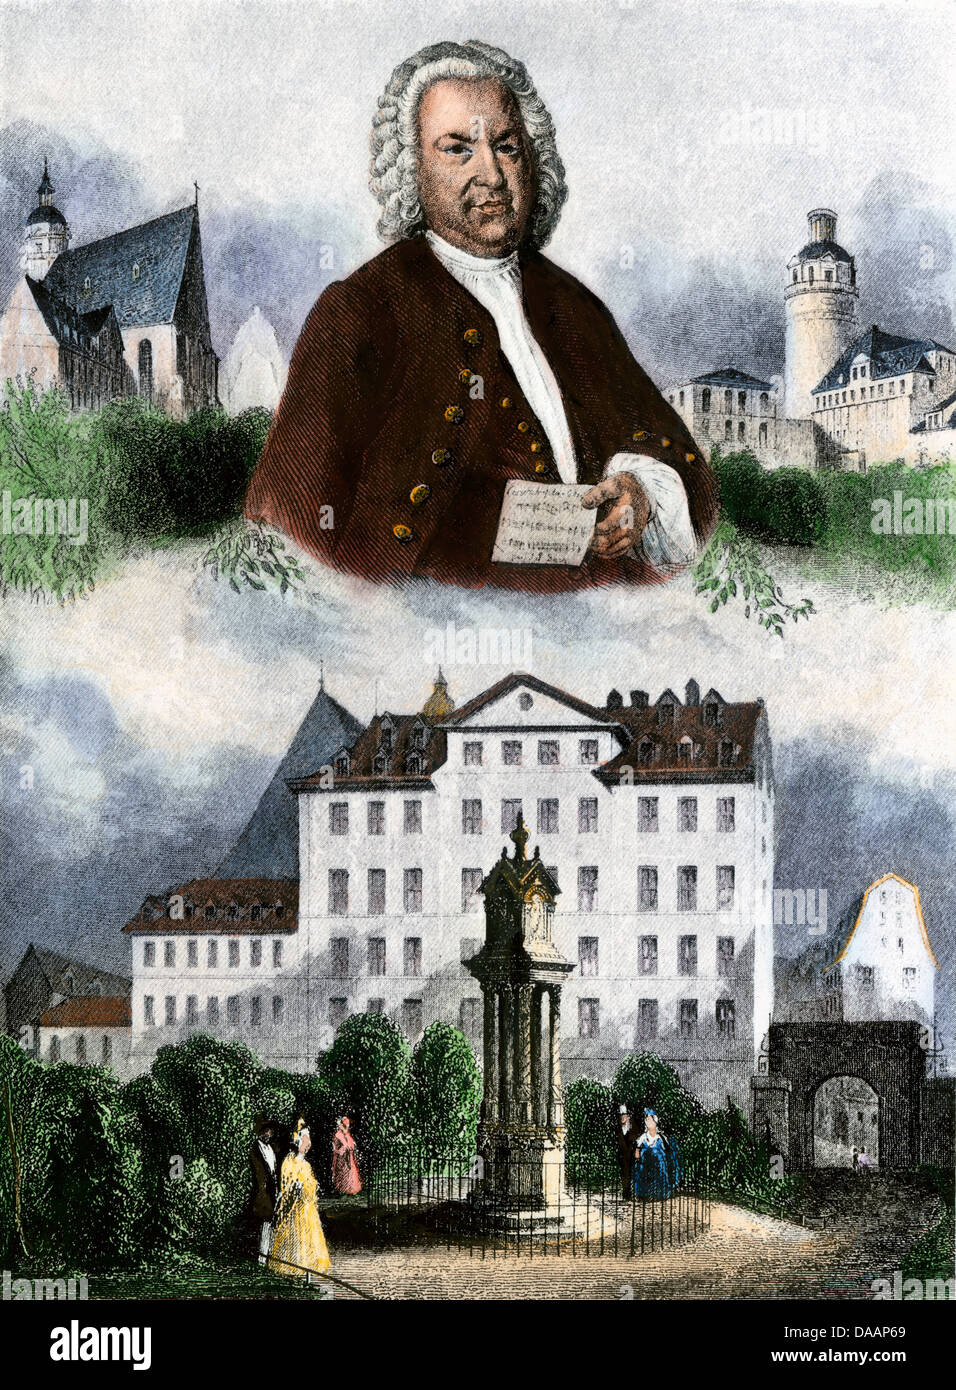 Composer Johann Sebastian Bach, with Thomas Church (upper left), Leipsig Observatory, and Bach Memorial. Hand-colored halftone of an illustration Stock Photo